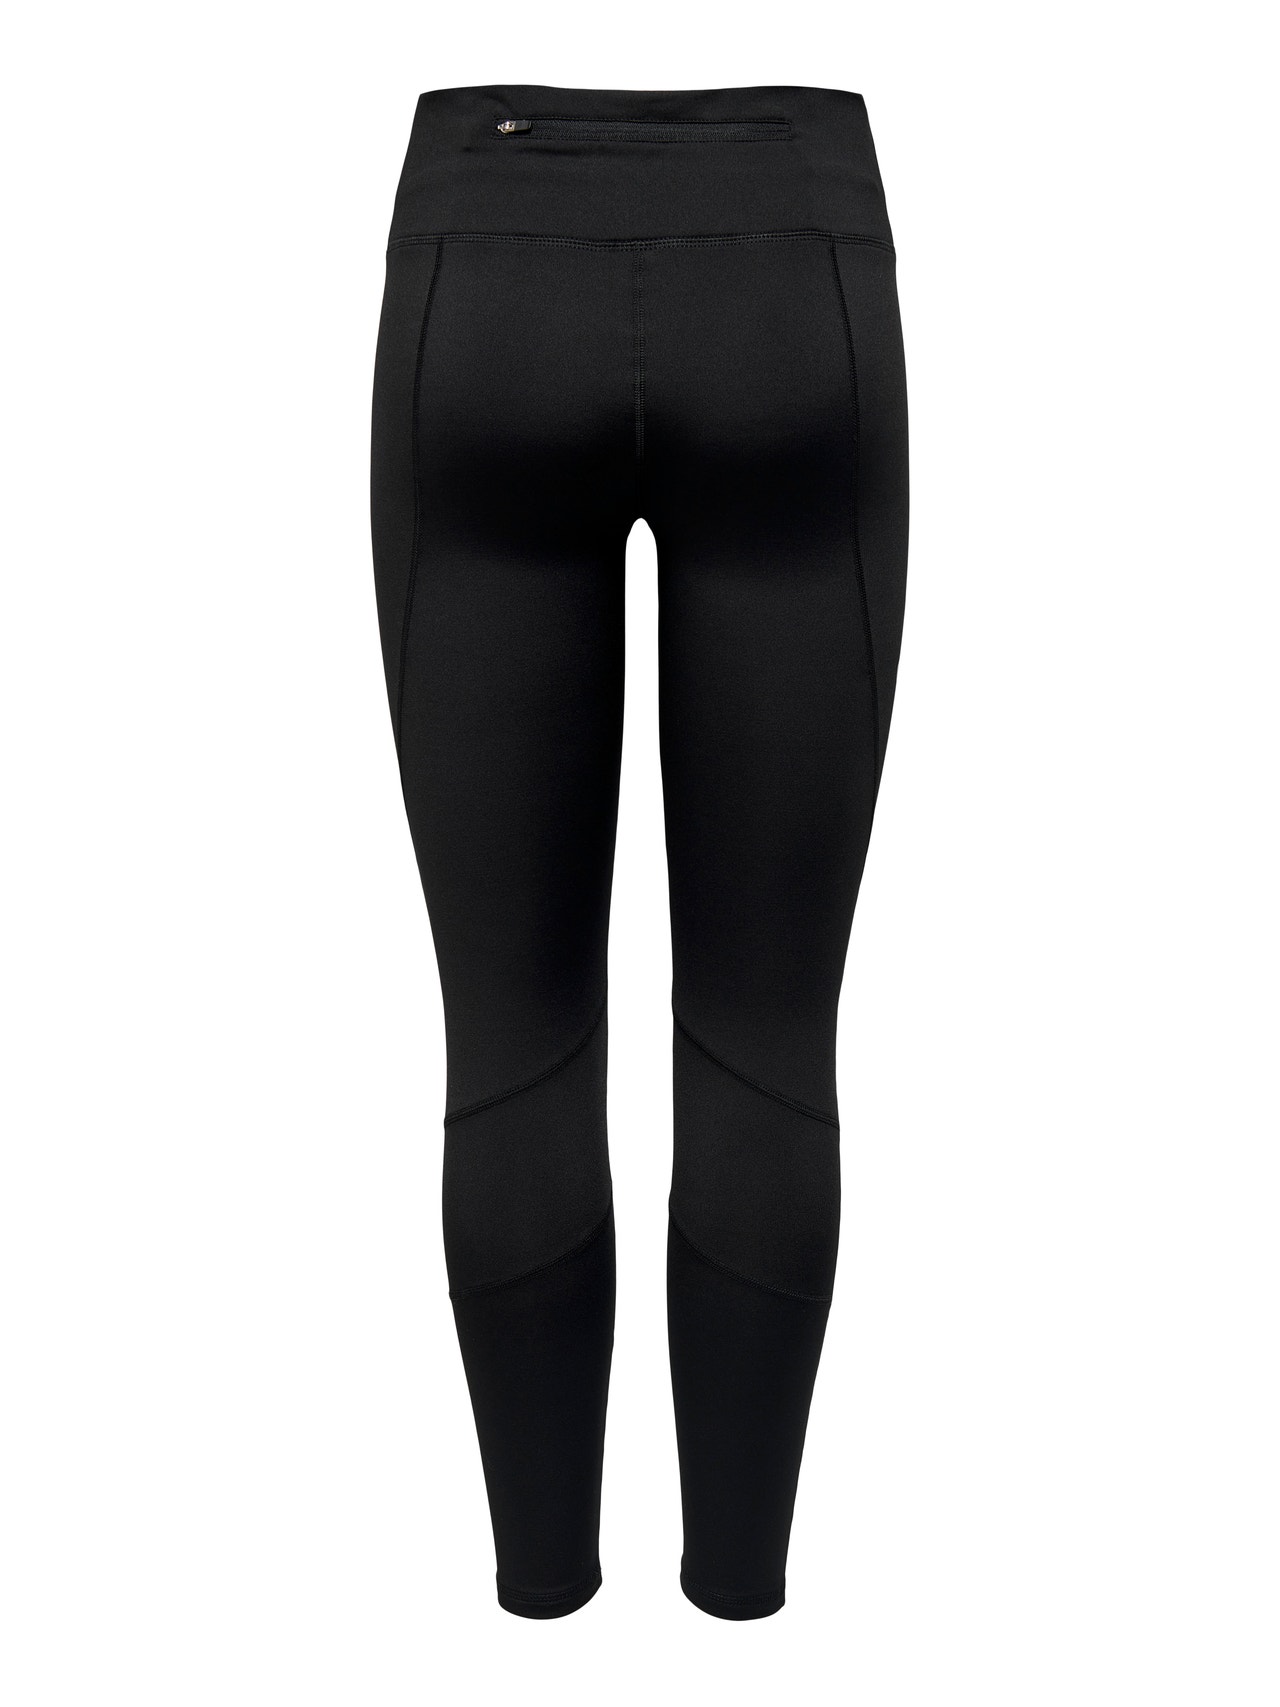 Solid colored Training Winter Tights, Black